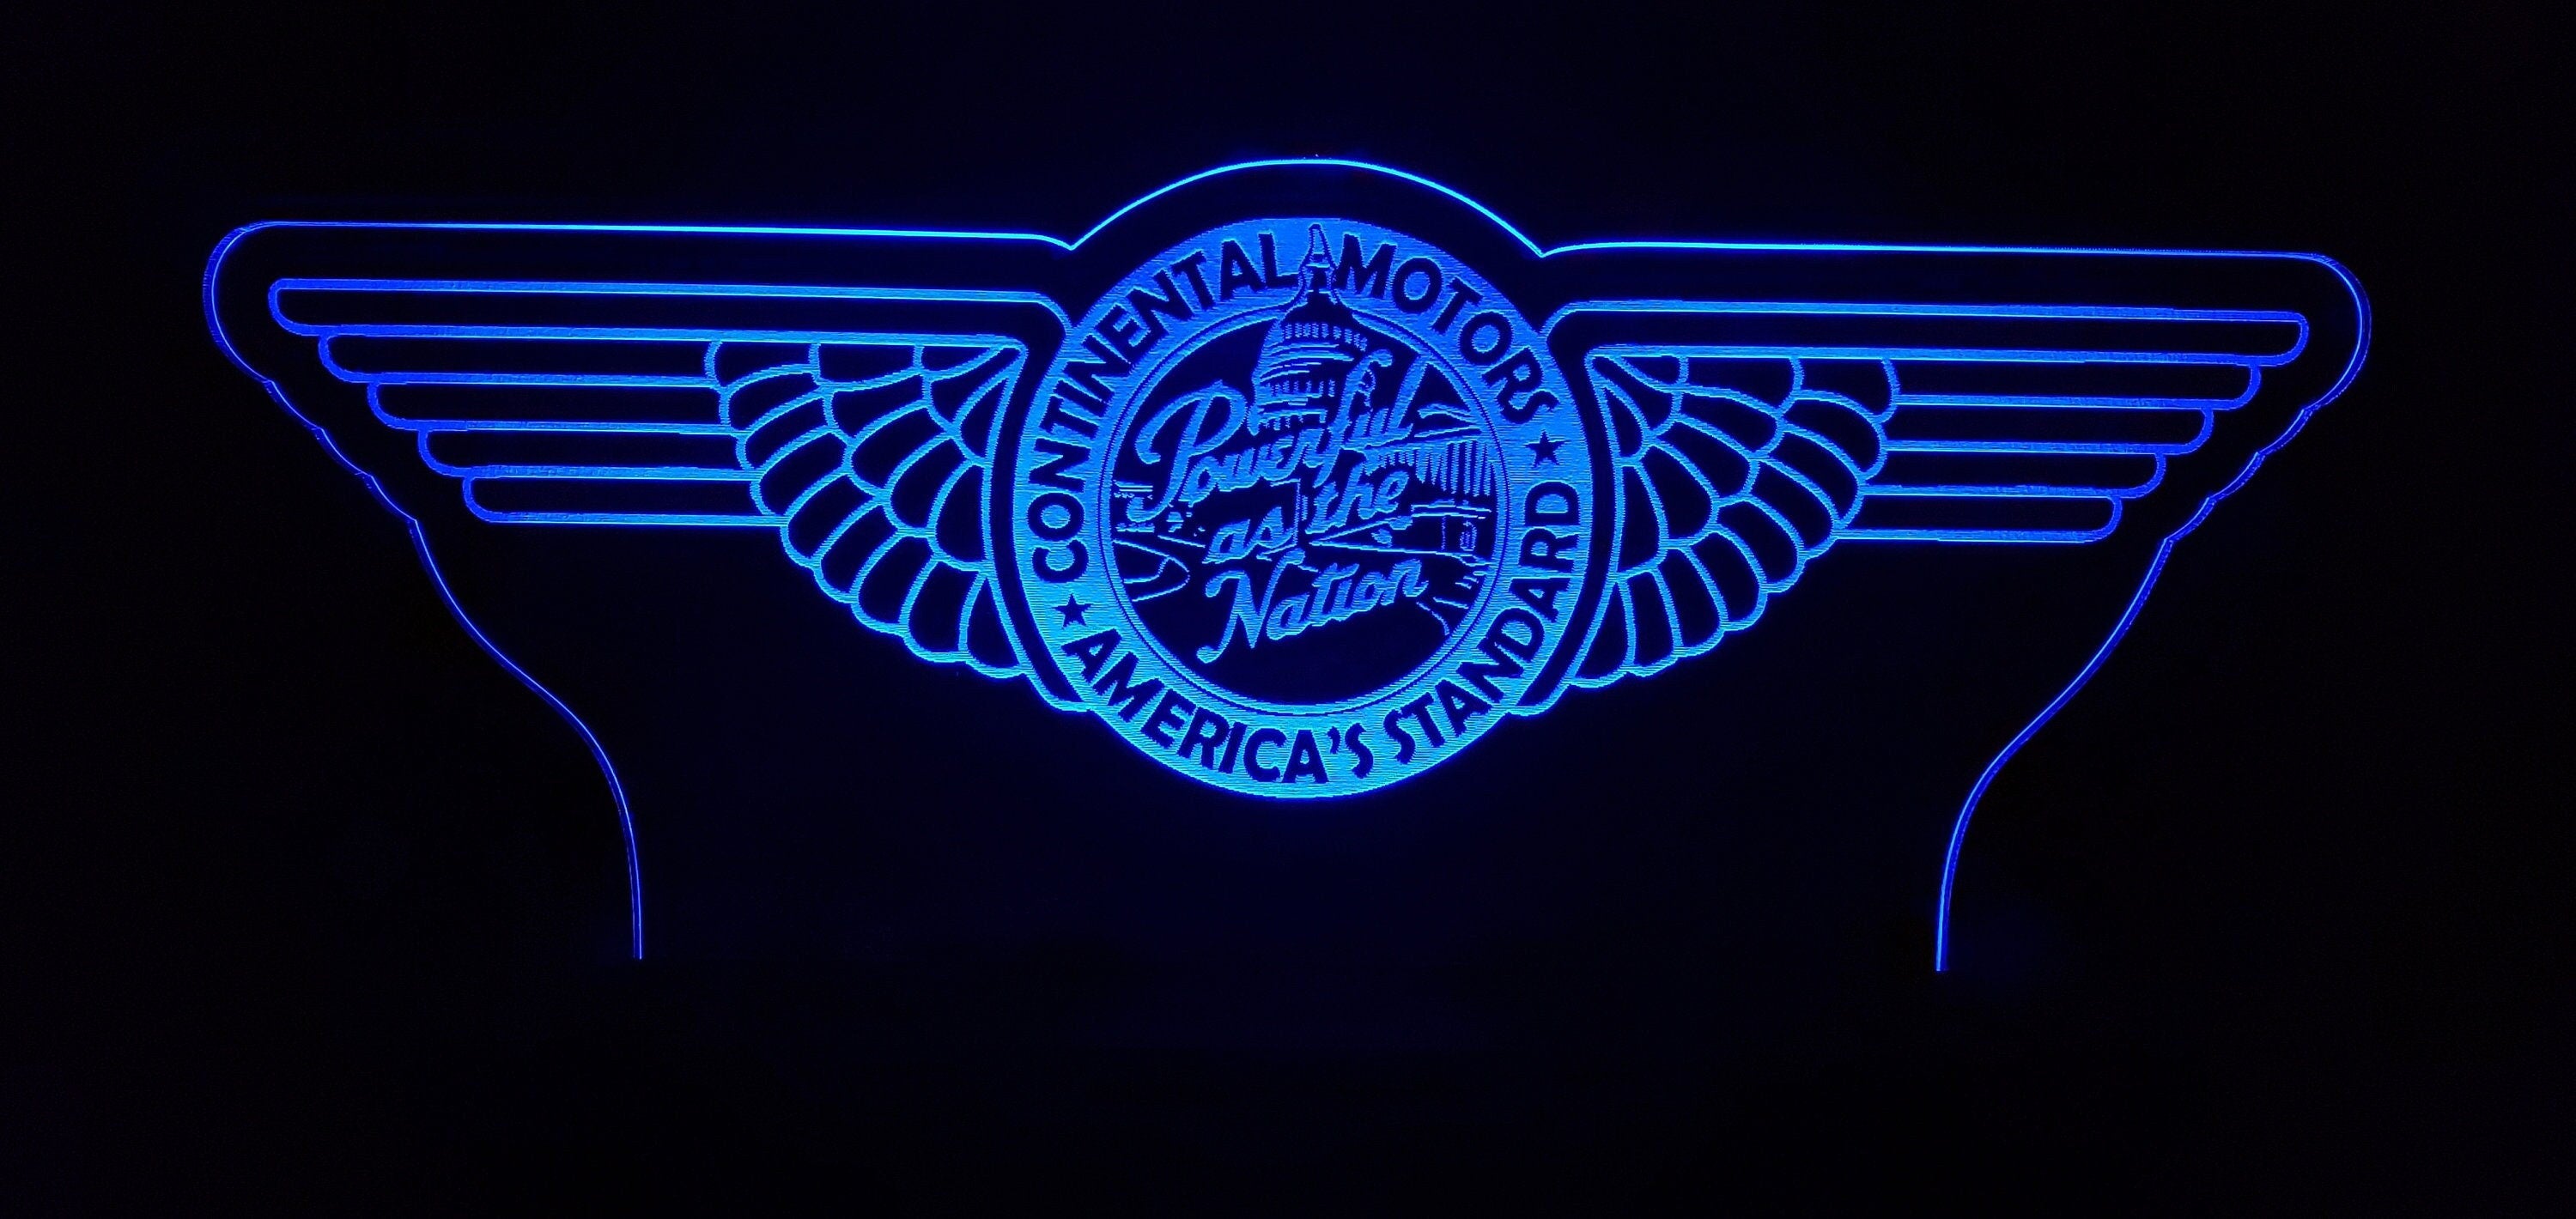 Vintage Continental motors logo LED light lamp/sign - Neon-like - Free shipping - Made in USA.